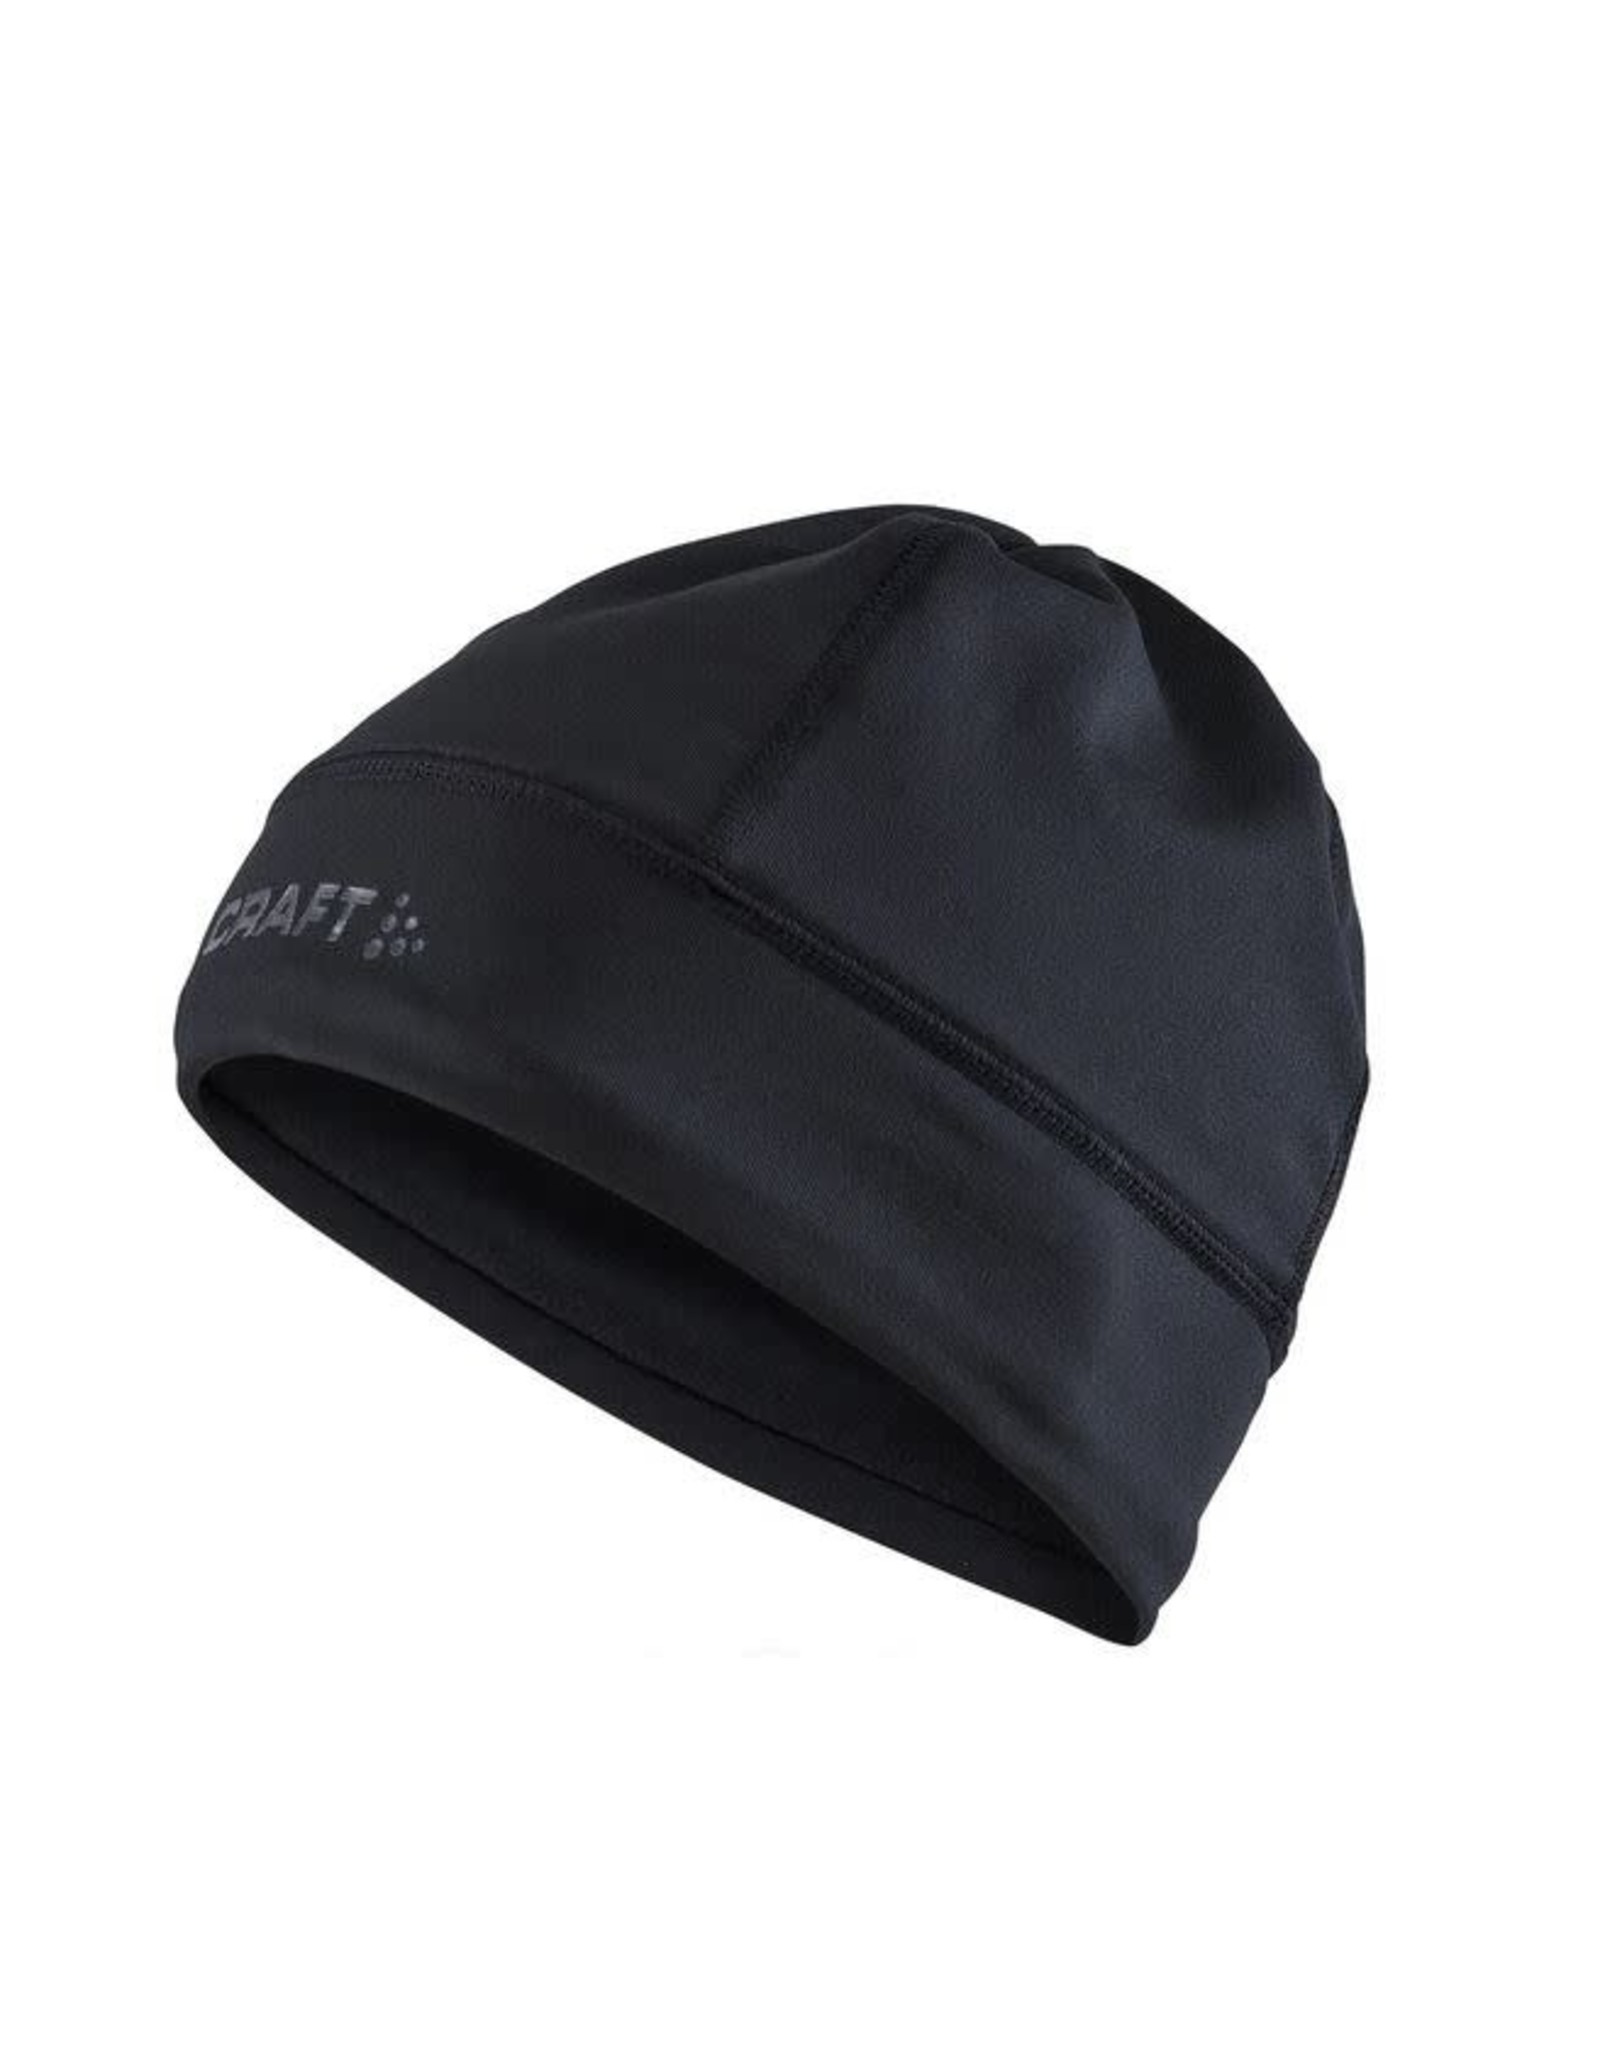 CRAFT CRAFT CORE ESSENCE THERMAL HAT